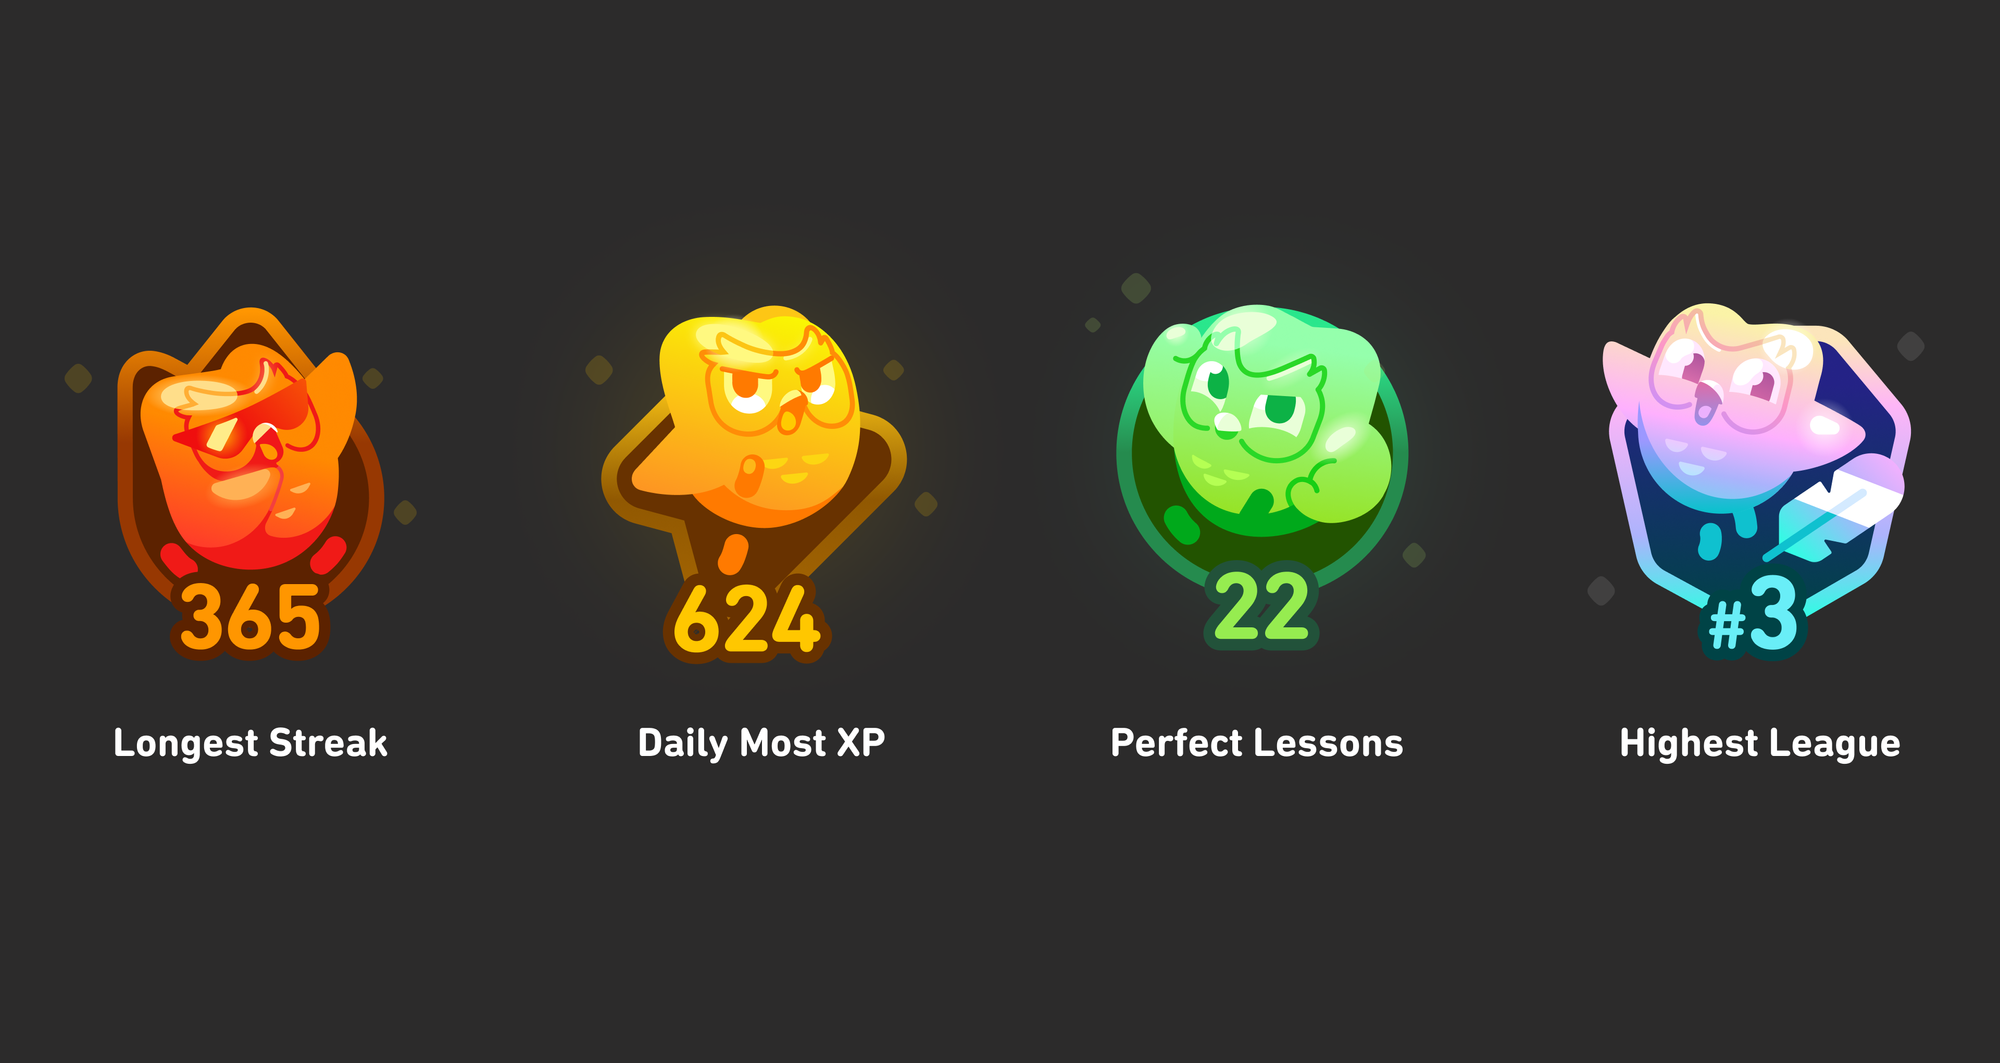 Four personal best badges, from left to right: Longest Streak, Daily Most XP, Perfect Lessons, Highest League